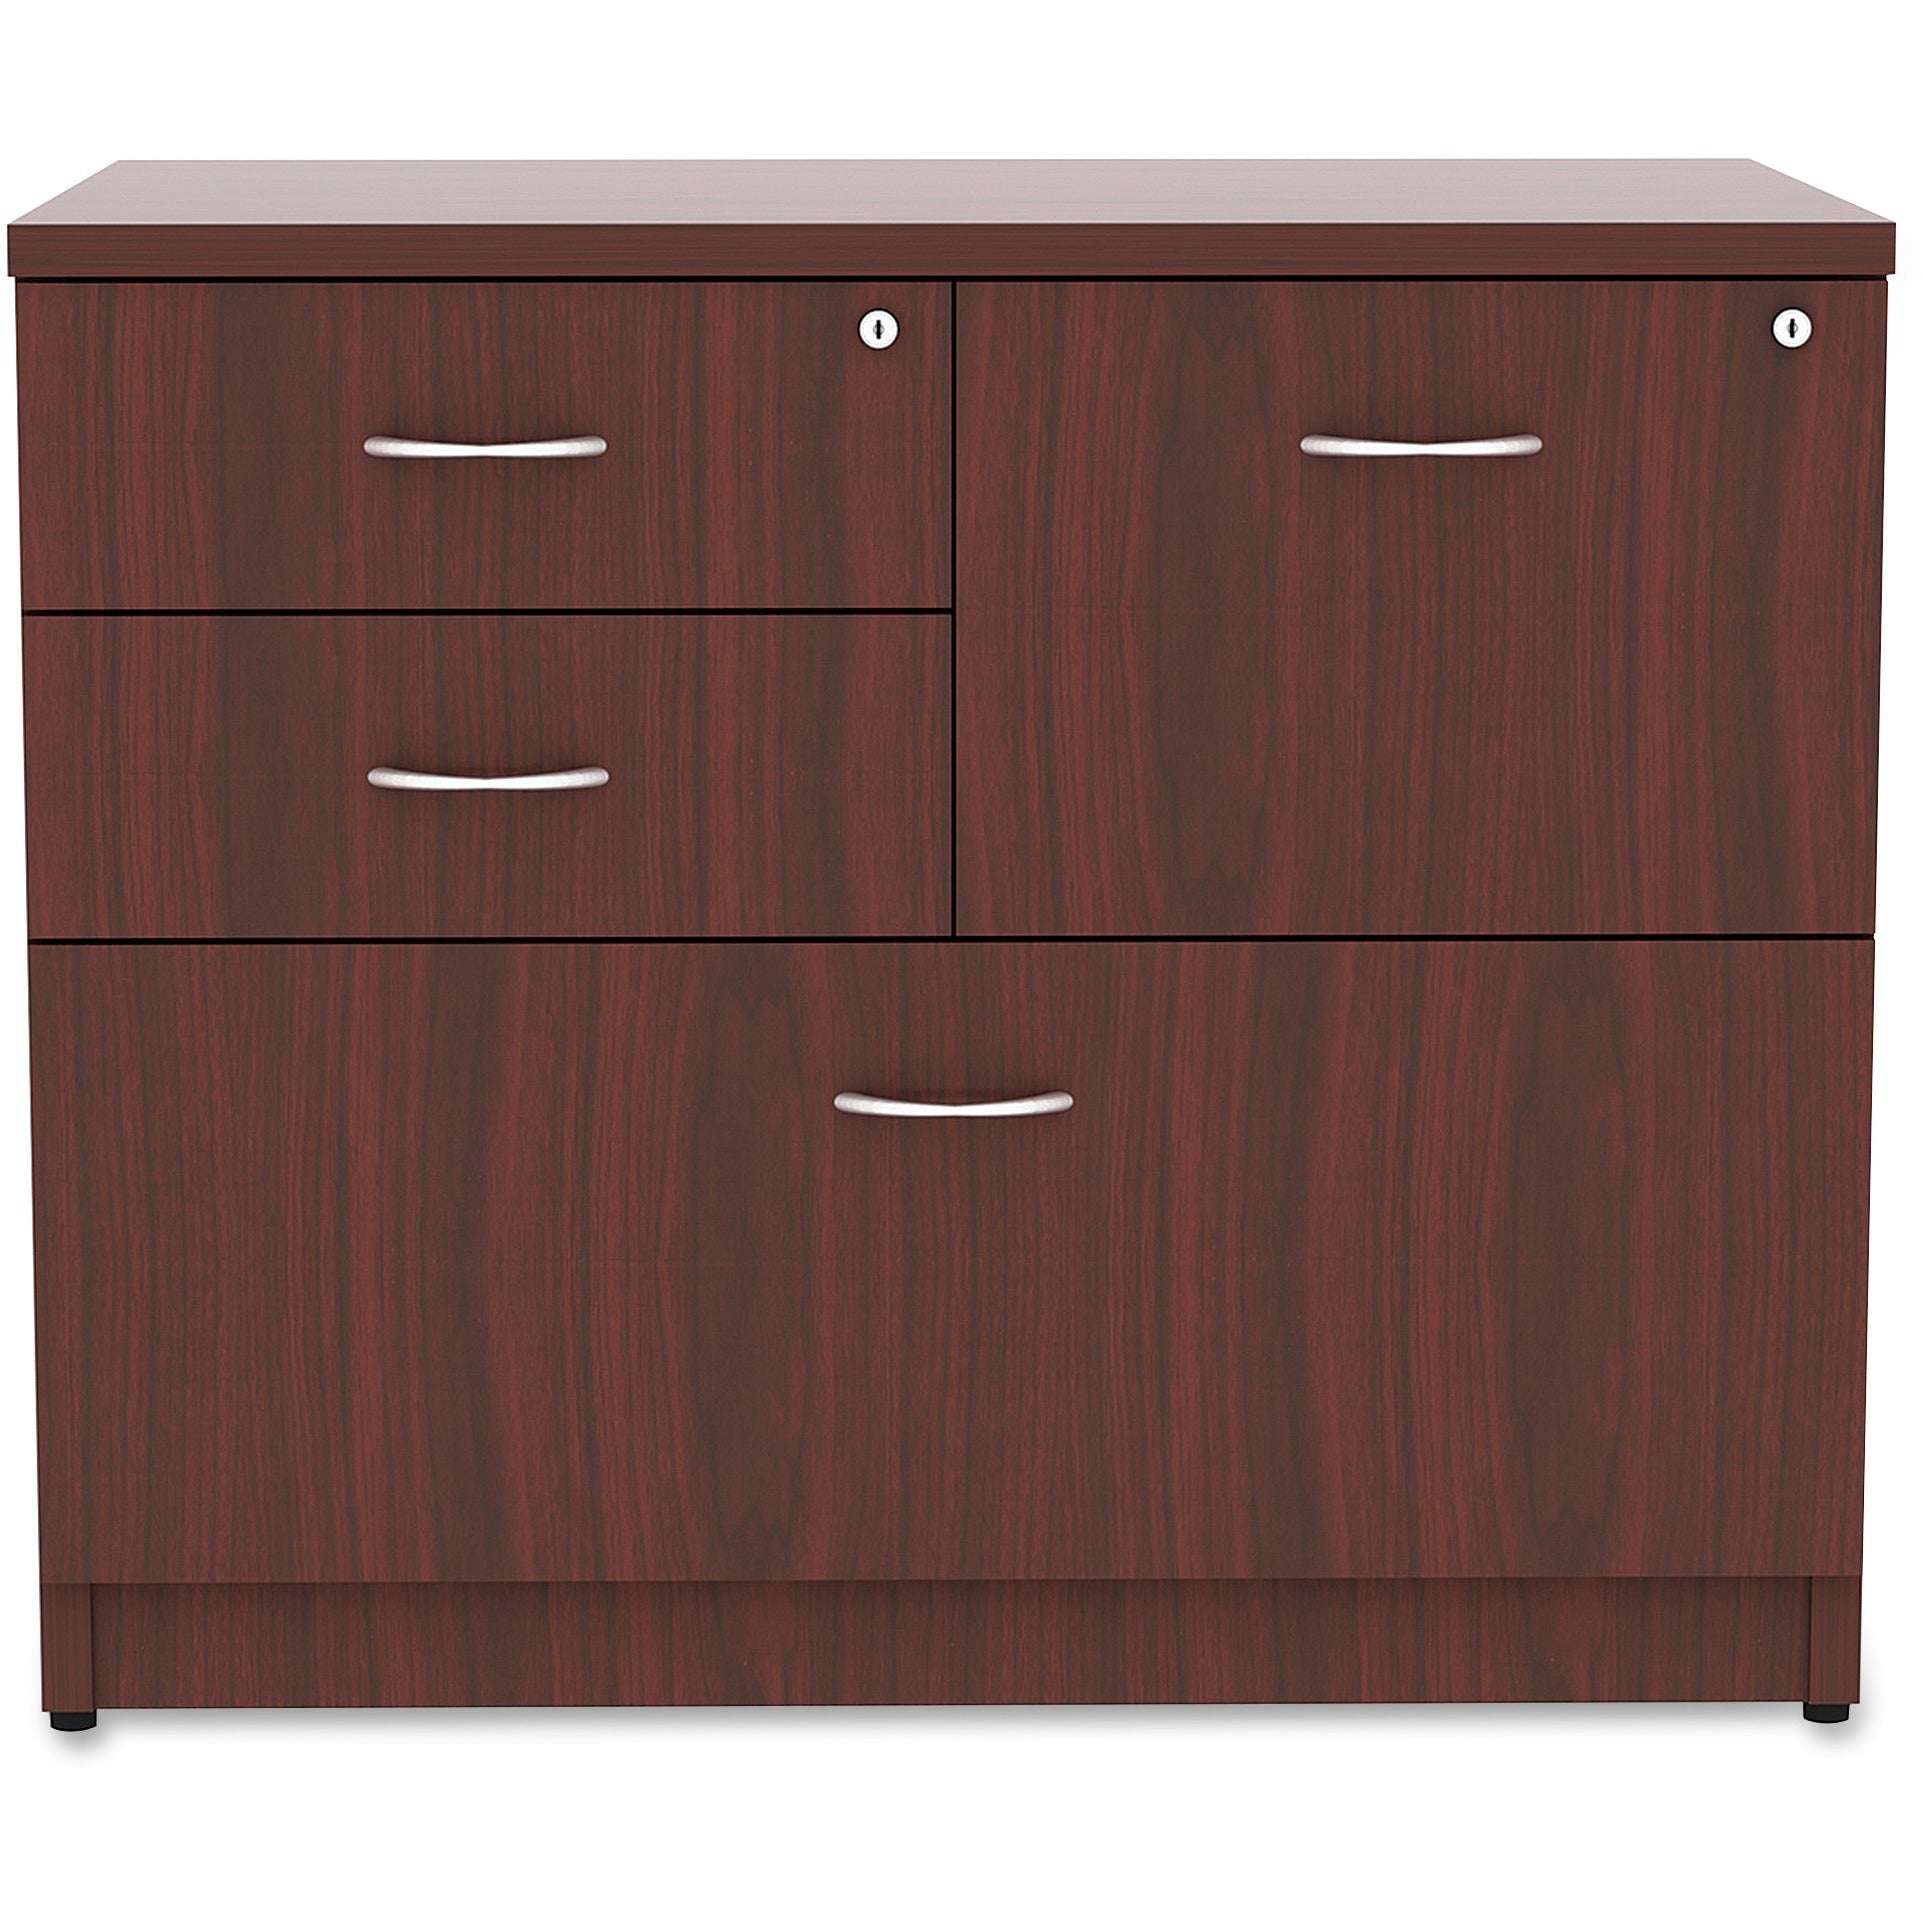 lorell-essentials-series-box-box-file-lateral-file-1-side-panel-01-edge-355-x-22295-lateral-file-4-x-box-file-drawers-mahogany-laminate-table-top-versatile-ball-bearing-glide-drawer-extension-security-lock-durable-adjustable_llr69541 - 2